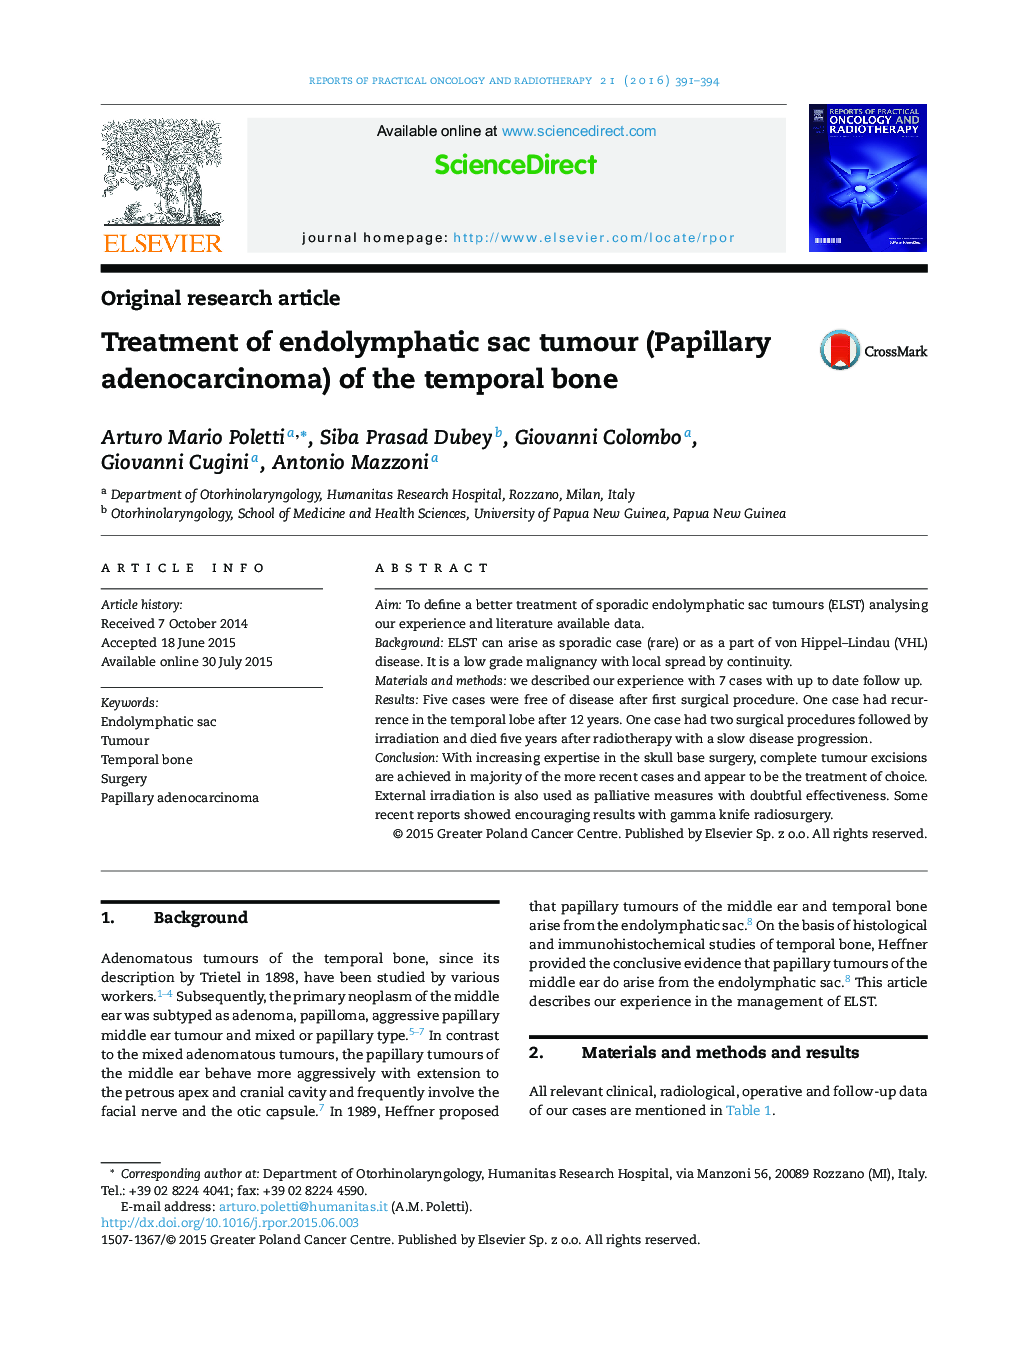 Treatment of endolymphatic sac tumour (Papillary adenocarcinoma) of the temporal bone